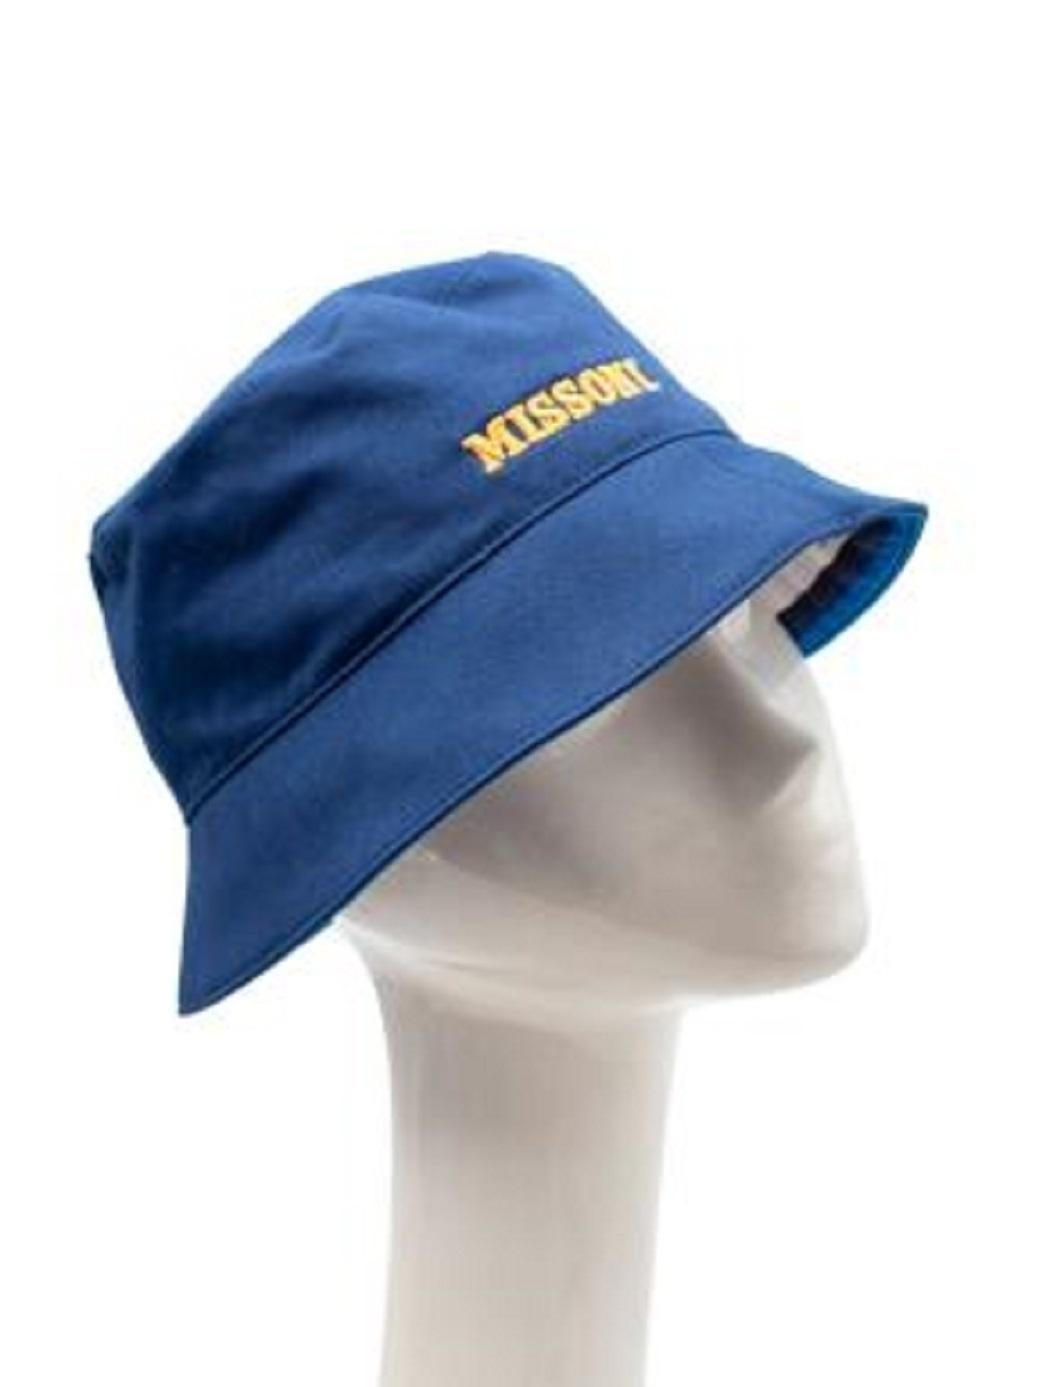 Missoni Blue Embroidered Bucket Hat

- Bold blue color 
- Embroidered yellow 